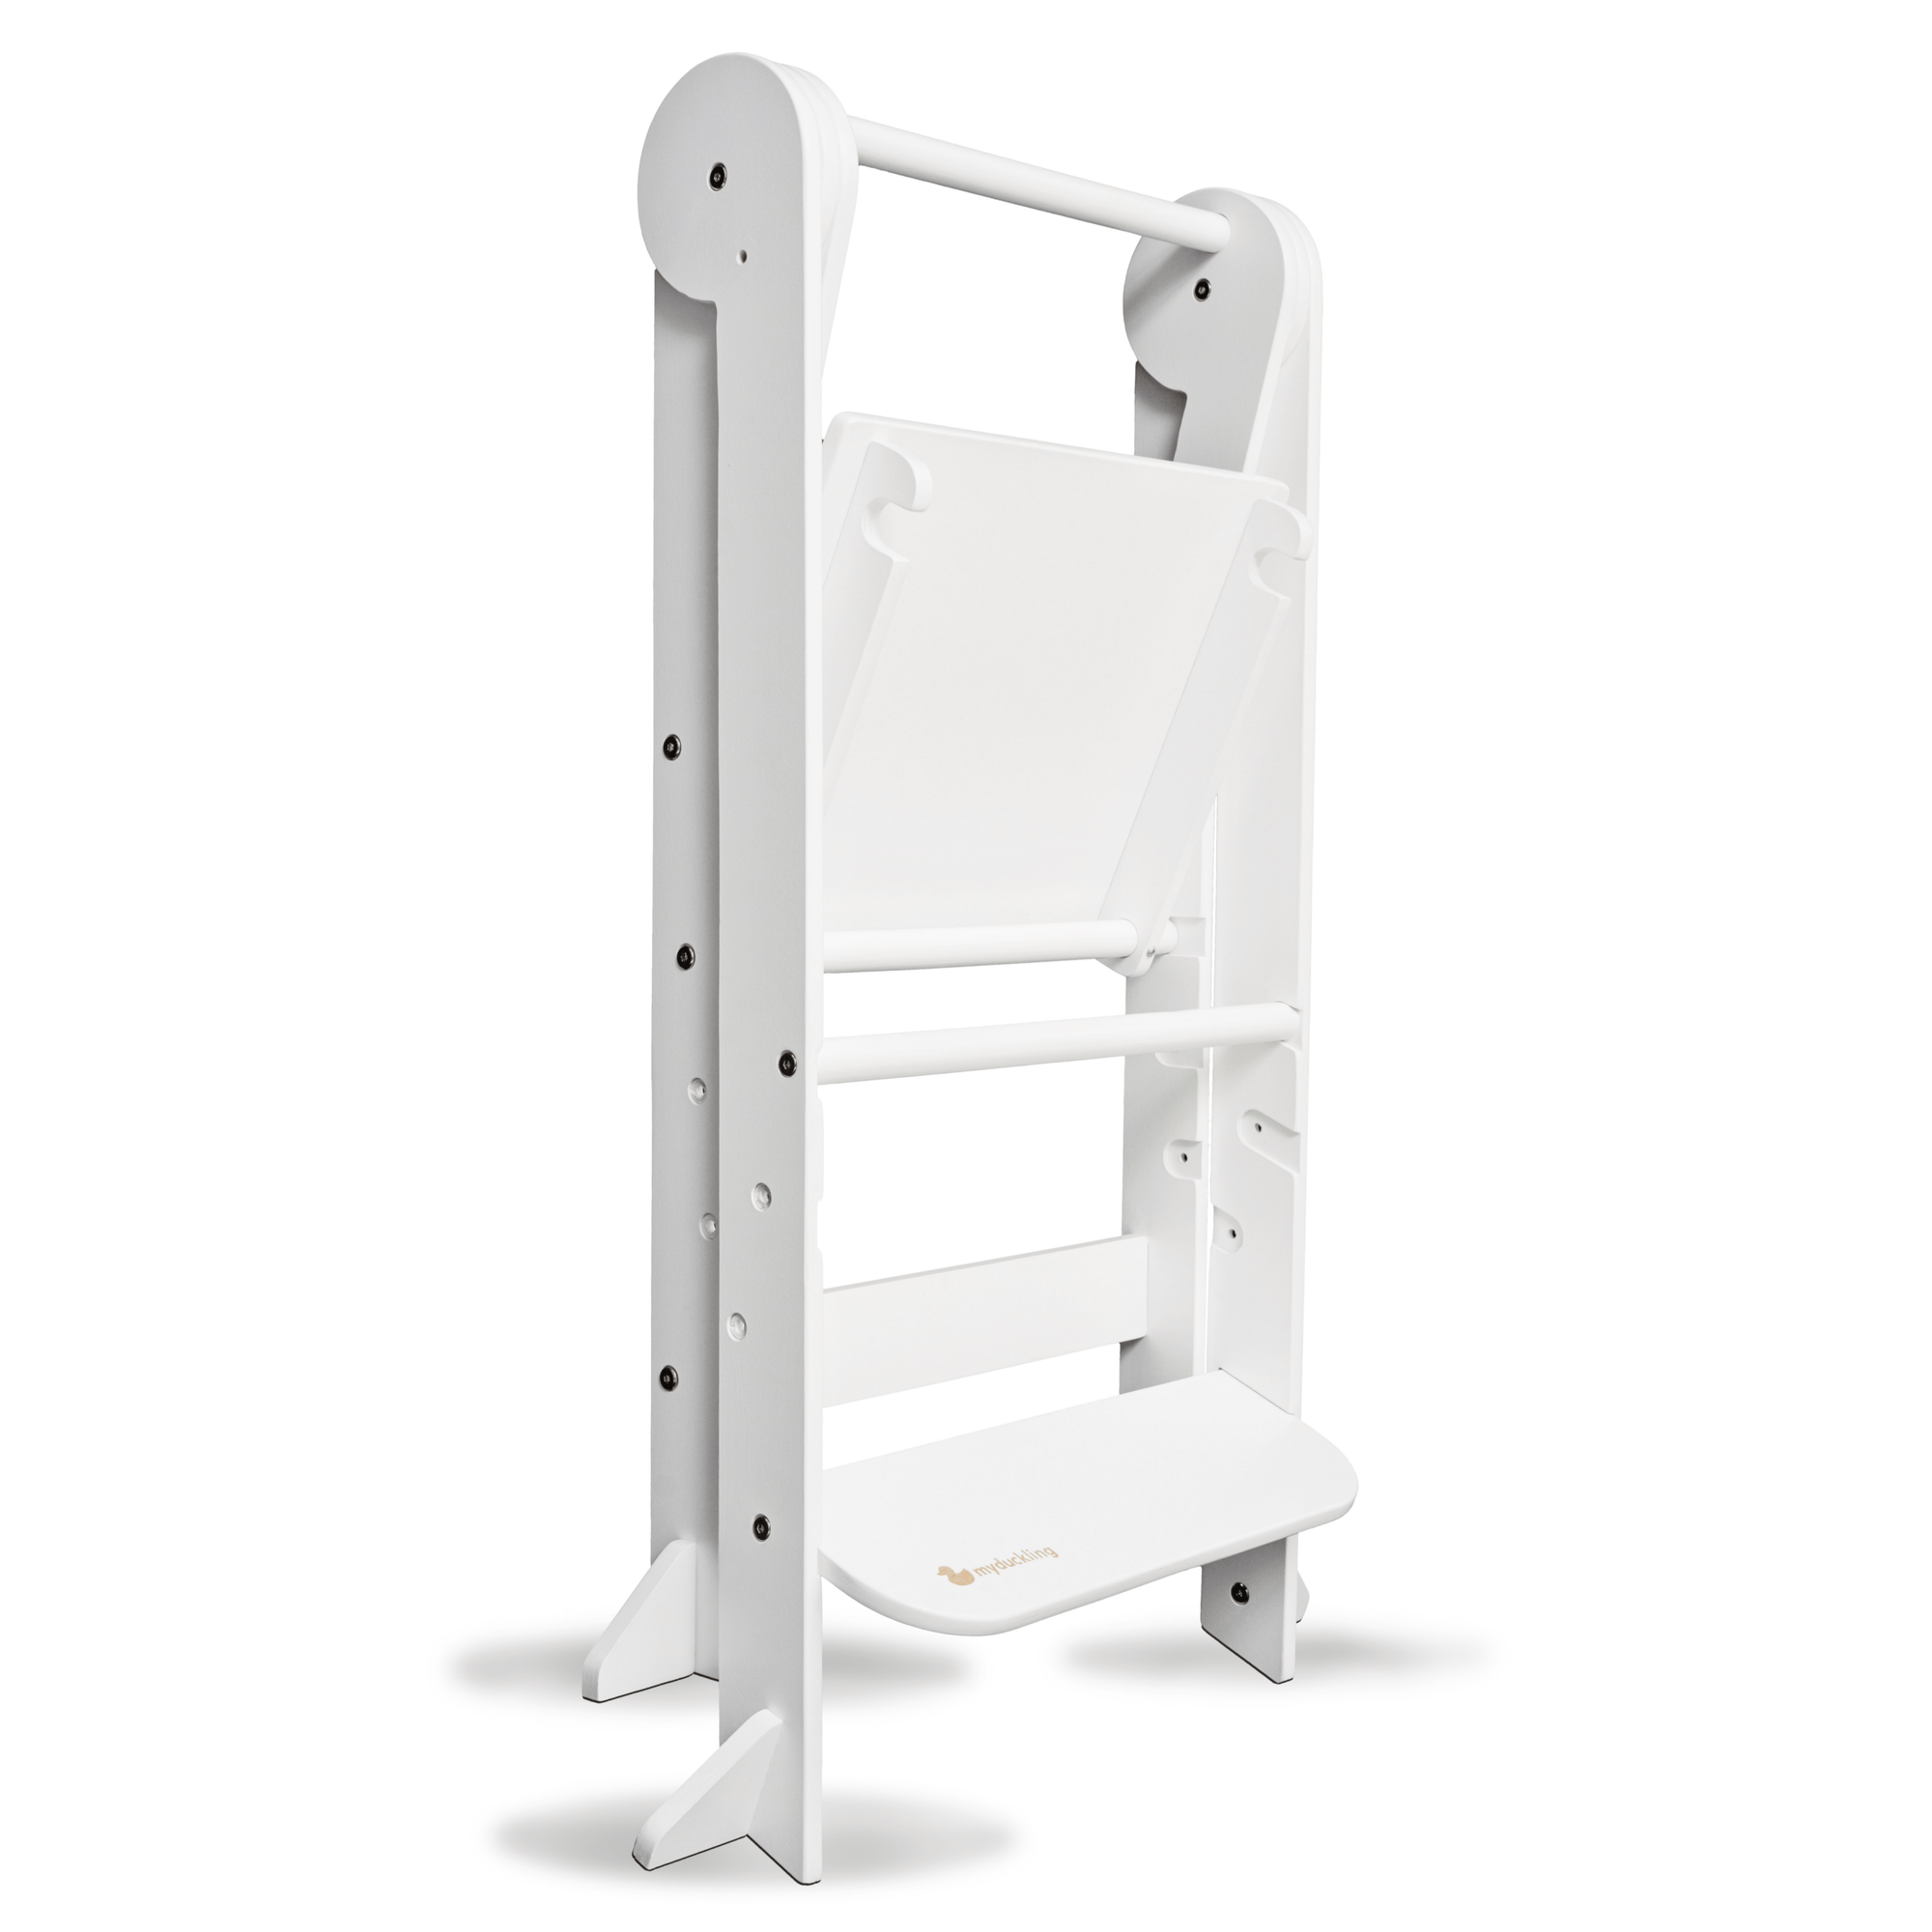 My Duckling MILA Deluxe Folding Adjustable Learning Tower - White